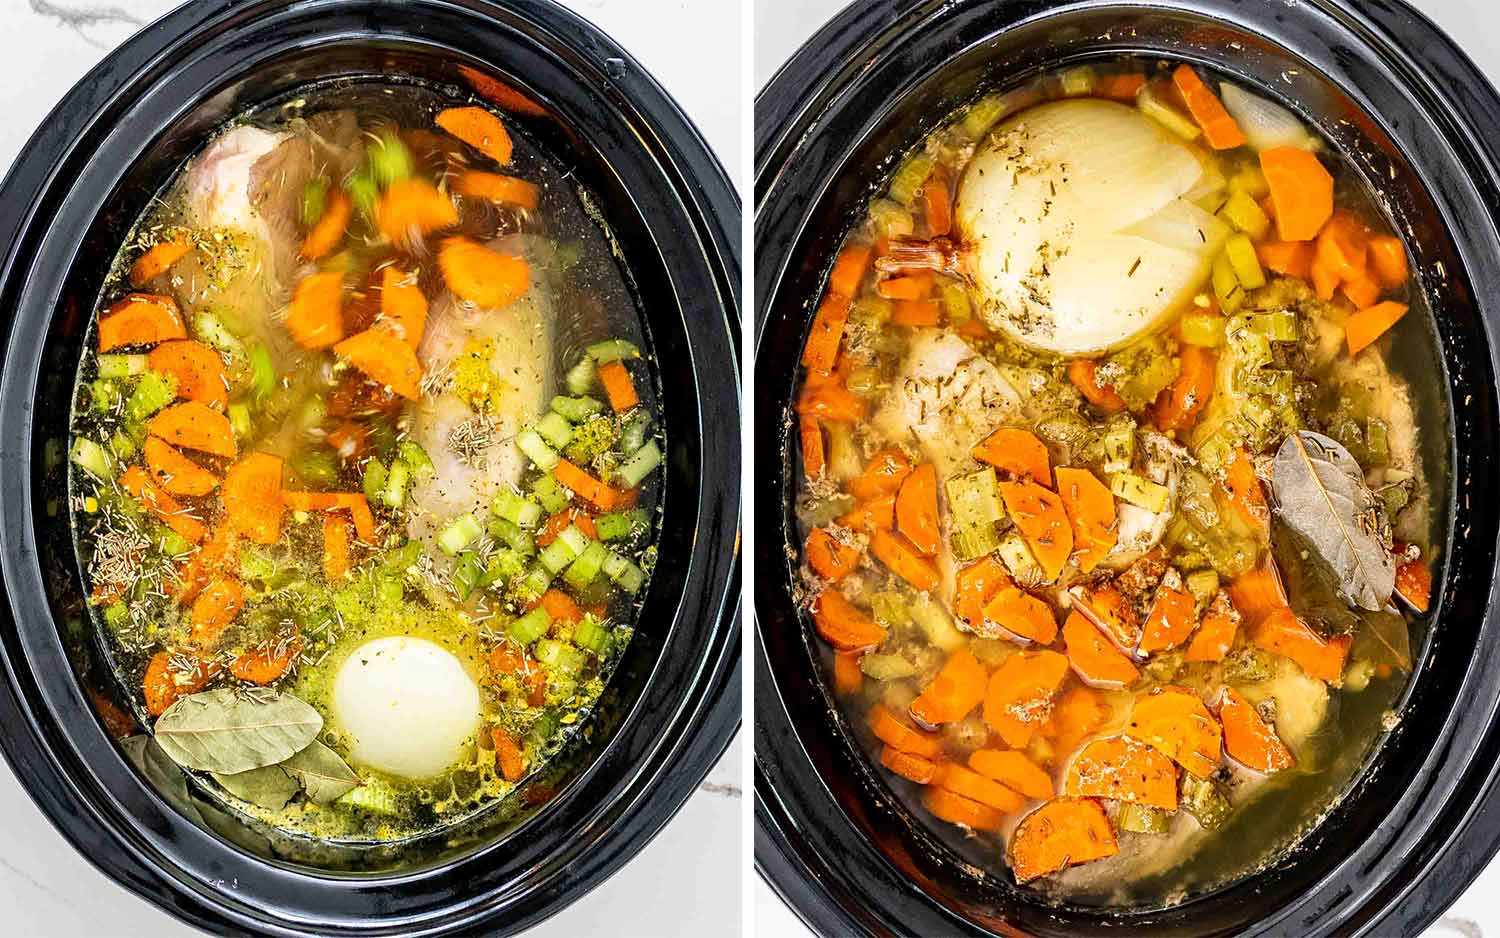 process shots showing how to make chicken noodle soup in a crockpot.